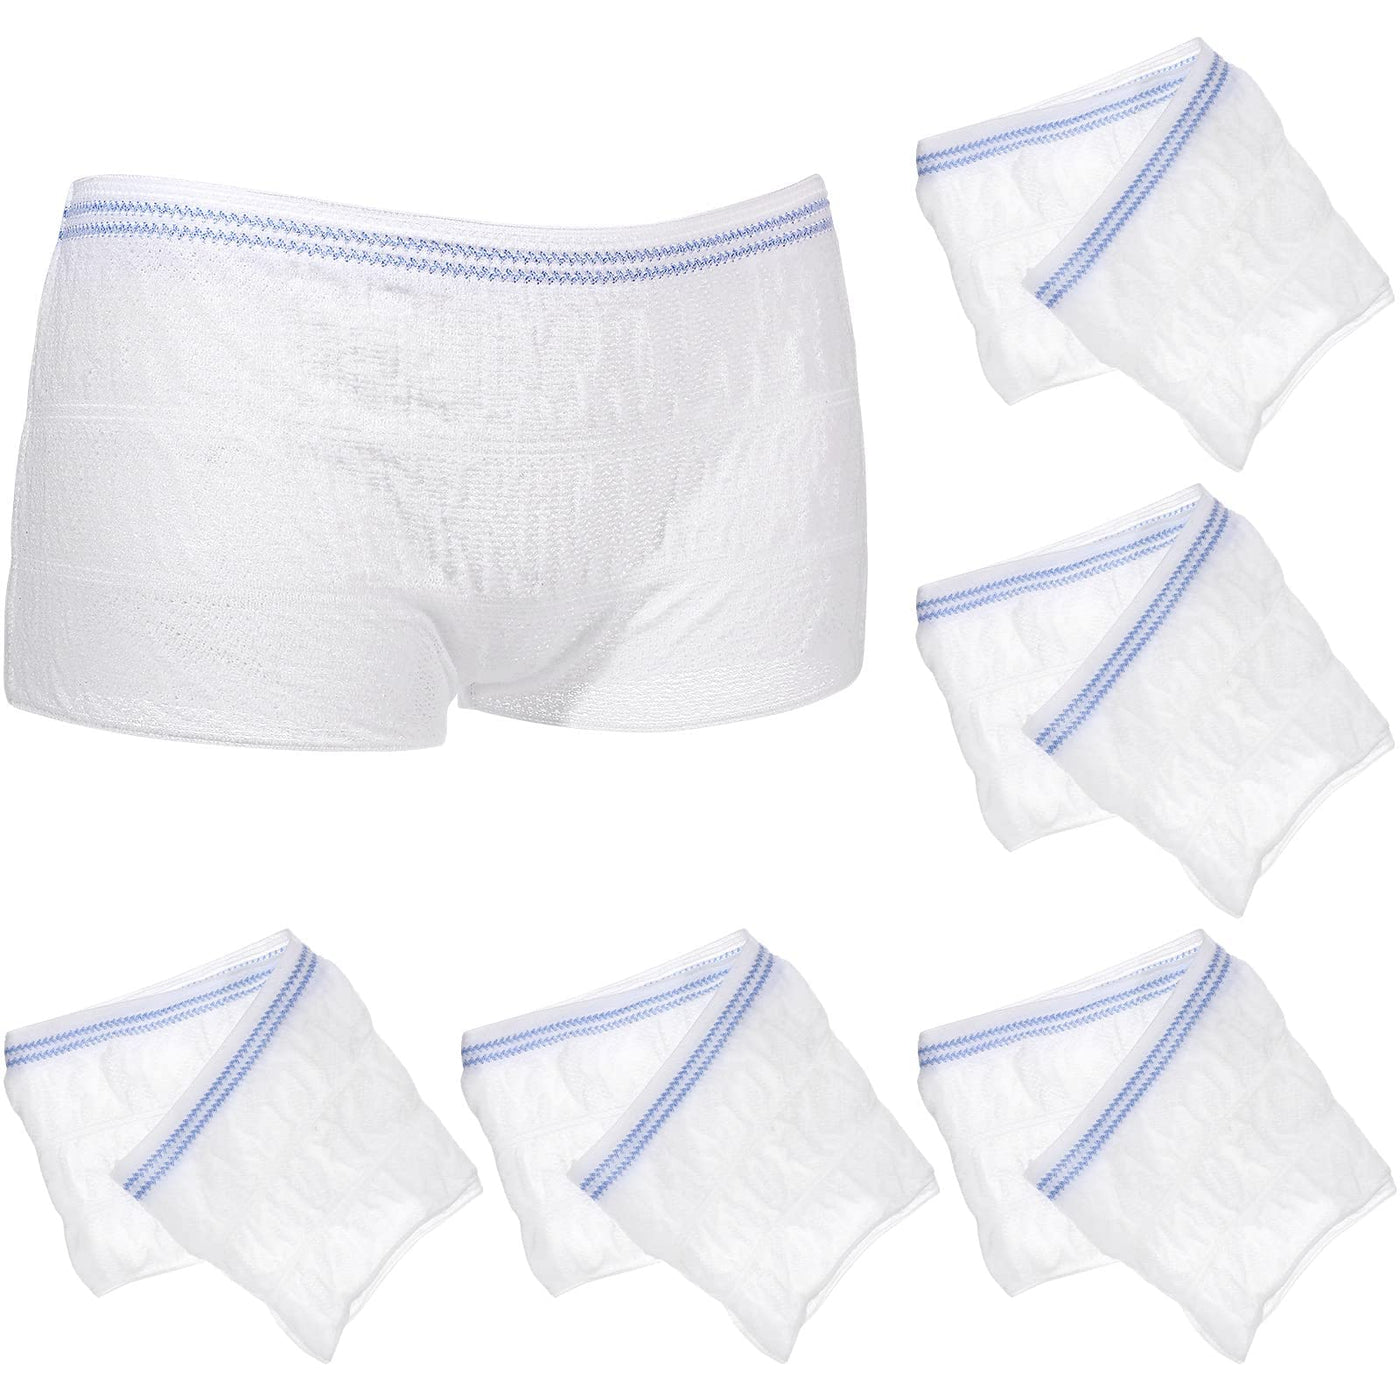 6pcs/Pack Seamless Mesh Postpartum Underwear For Vaginal Delivery